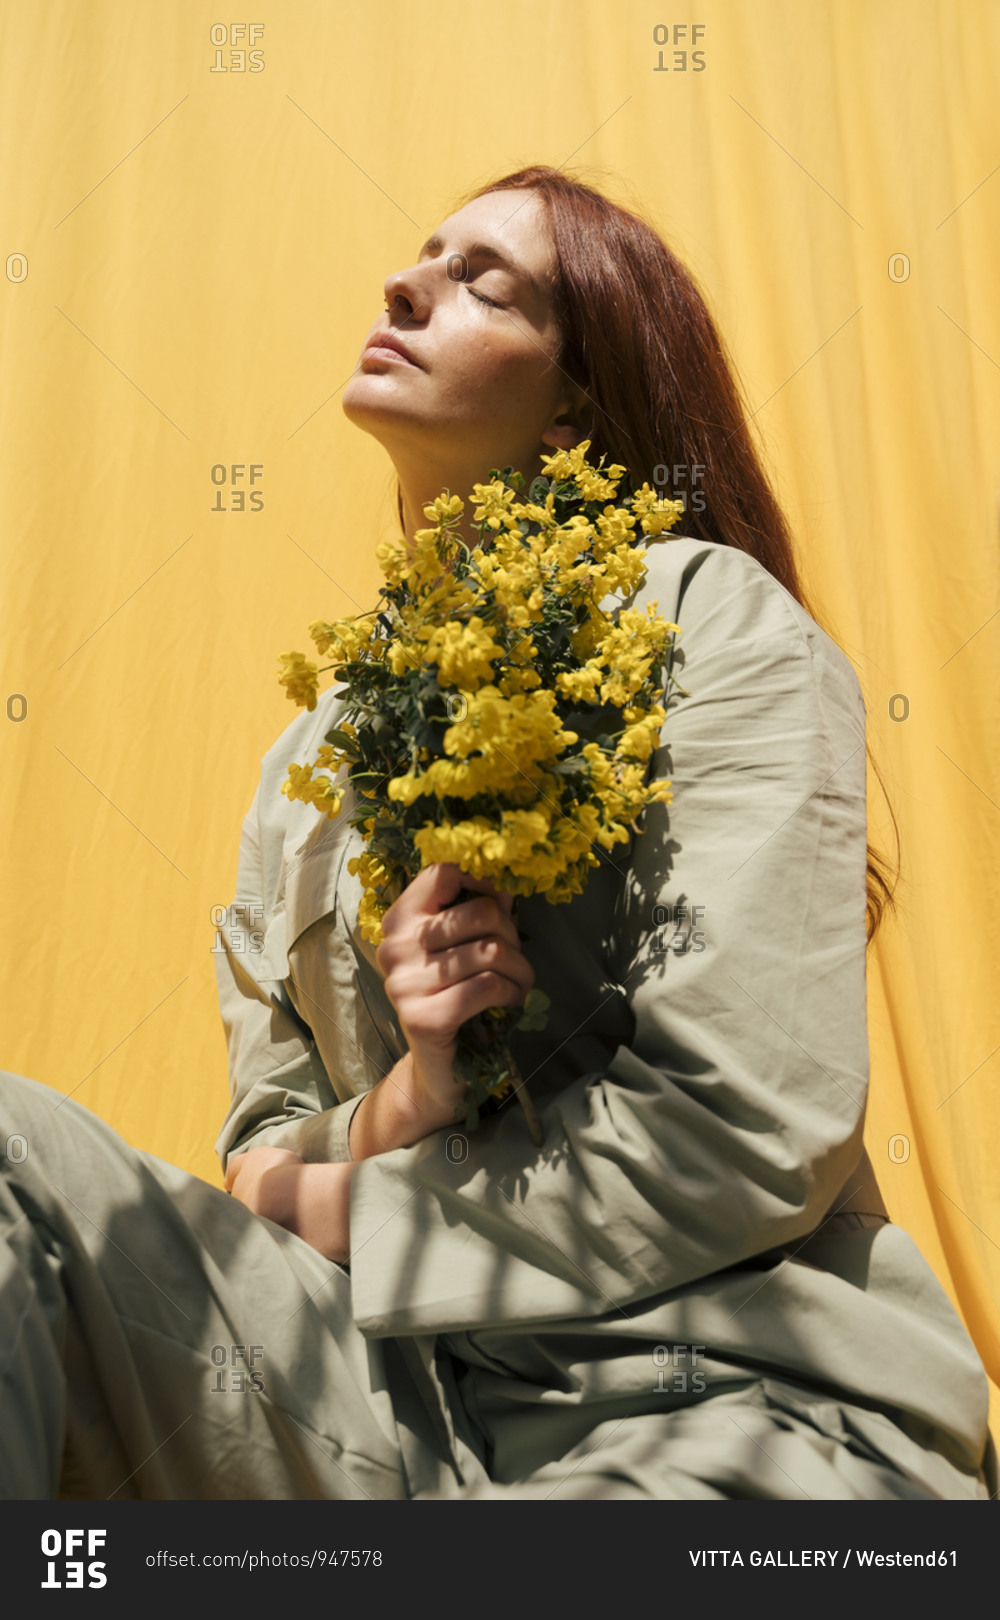 Portrait of redheaded woman with eyes closed holding bunch of yellow flowers against yellow background